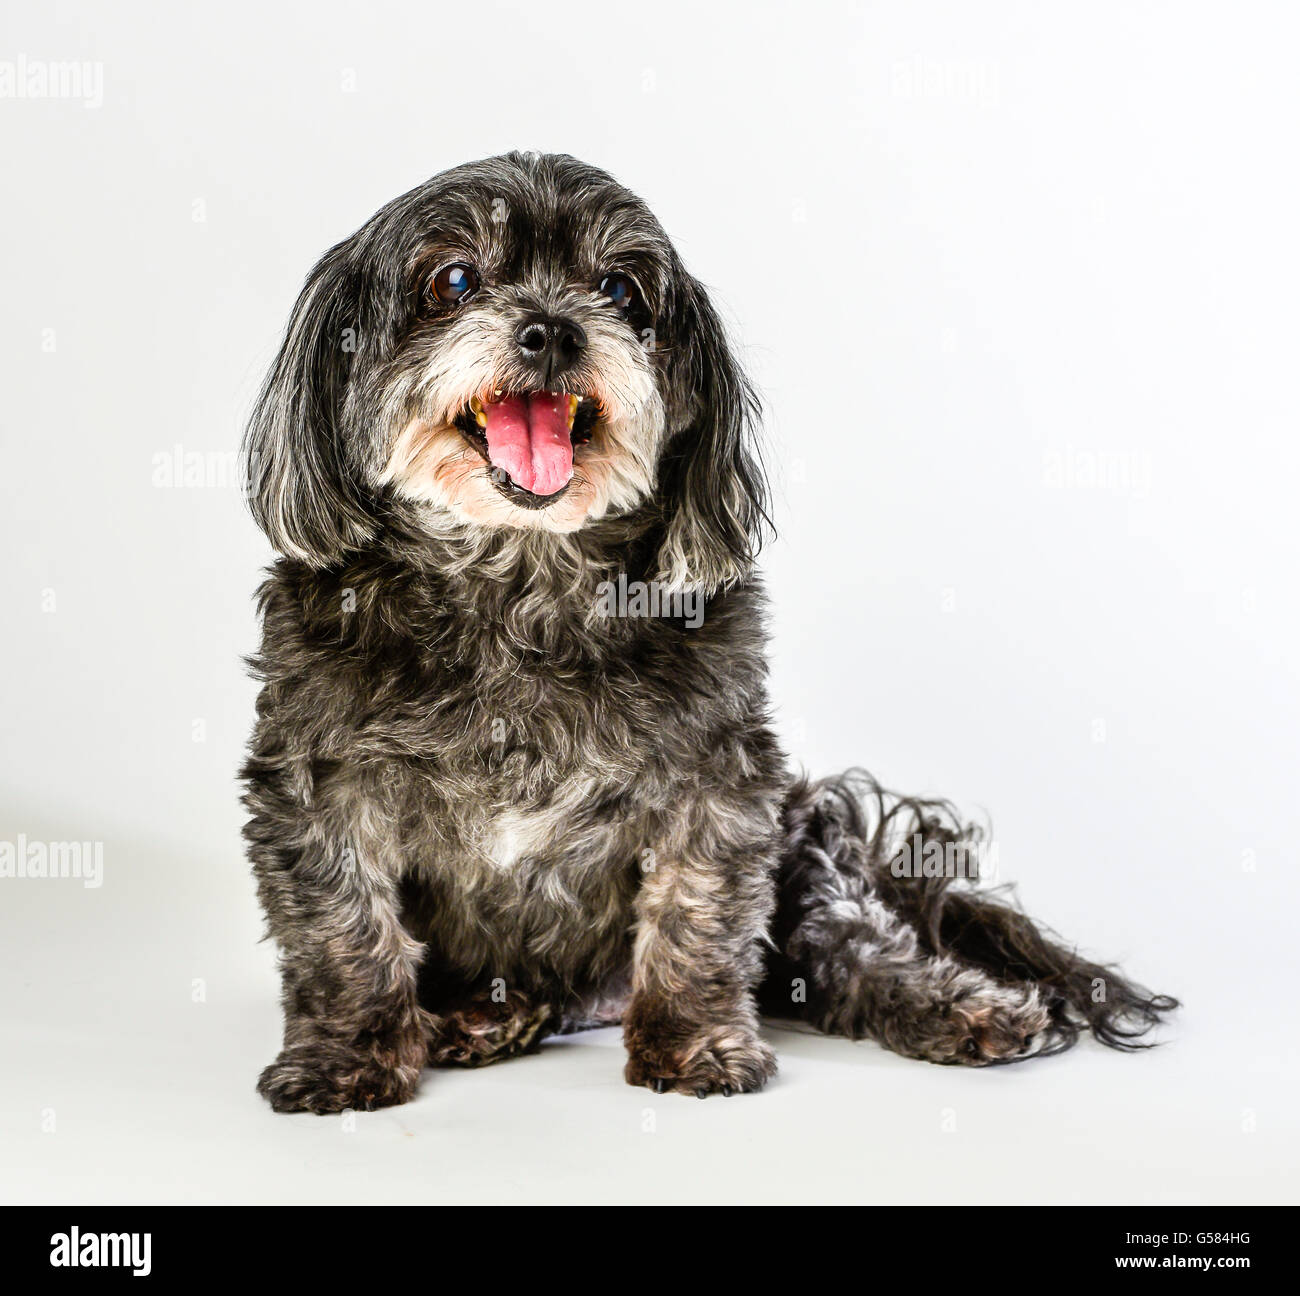 An adorable dark tri-colored mixed breed small dog with tongue out posing and smiling on white background Stock Photo